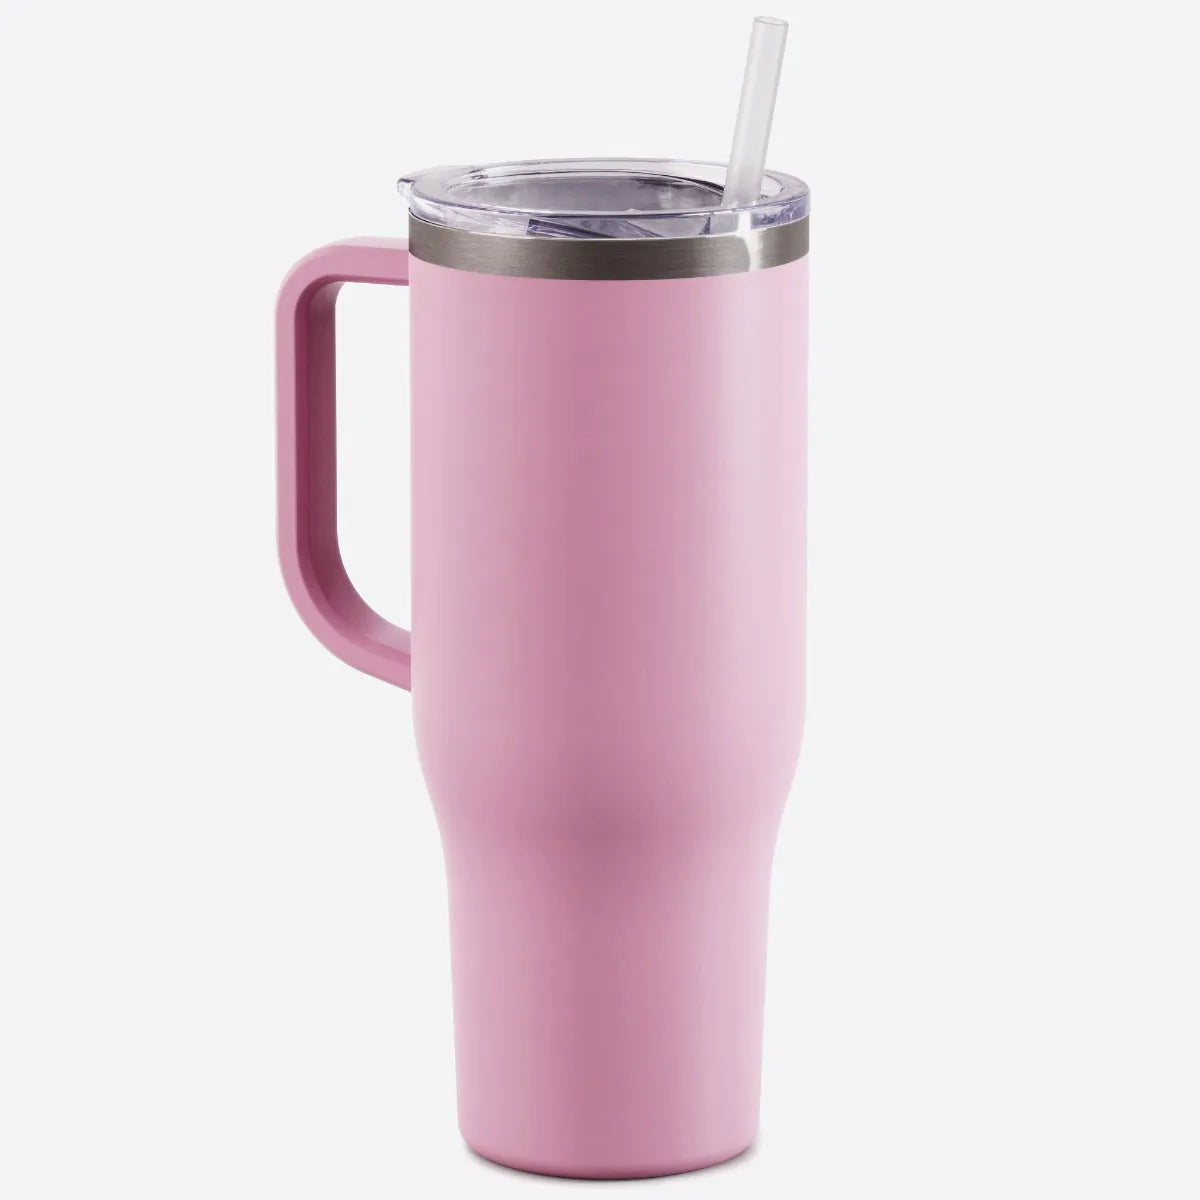 Step Into It - Dusty Rose Travel Tumbler, 30oz, Pink